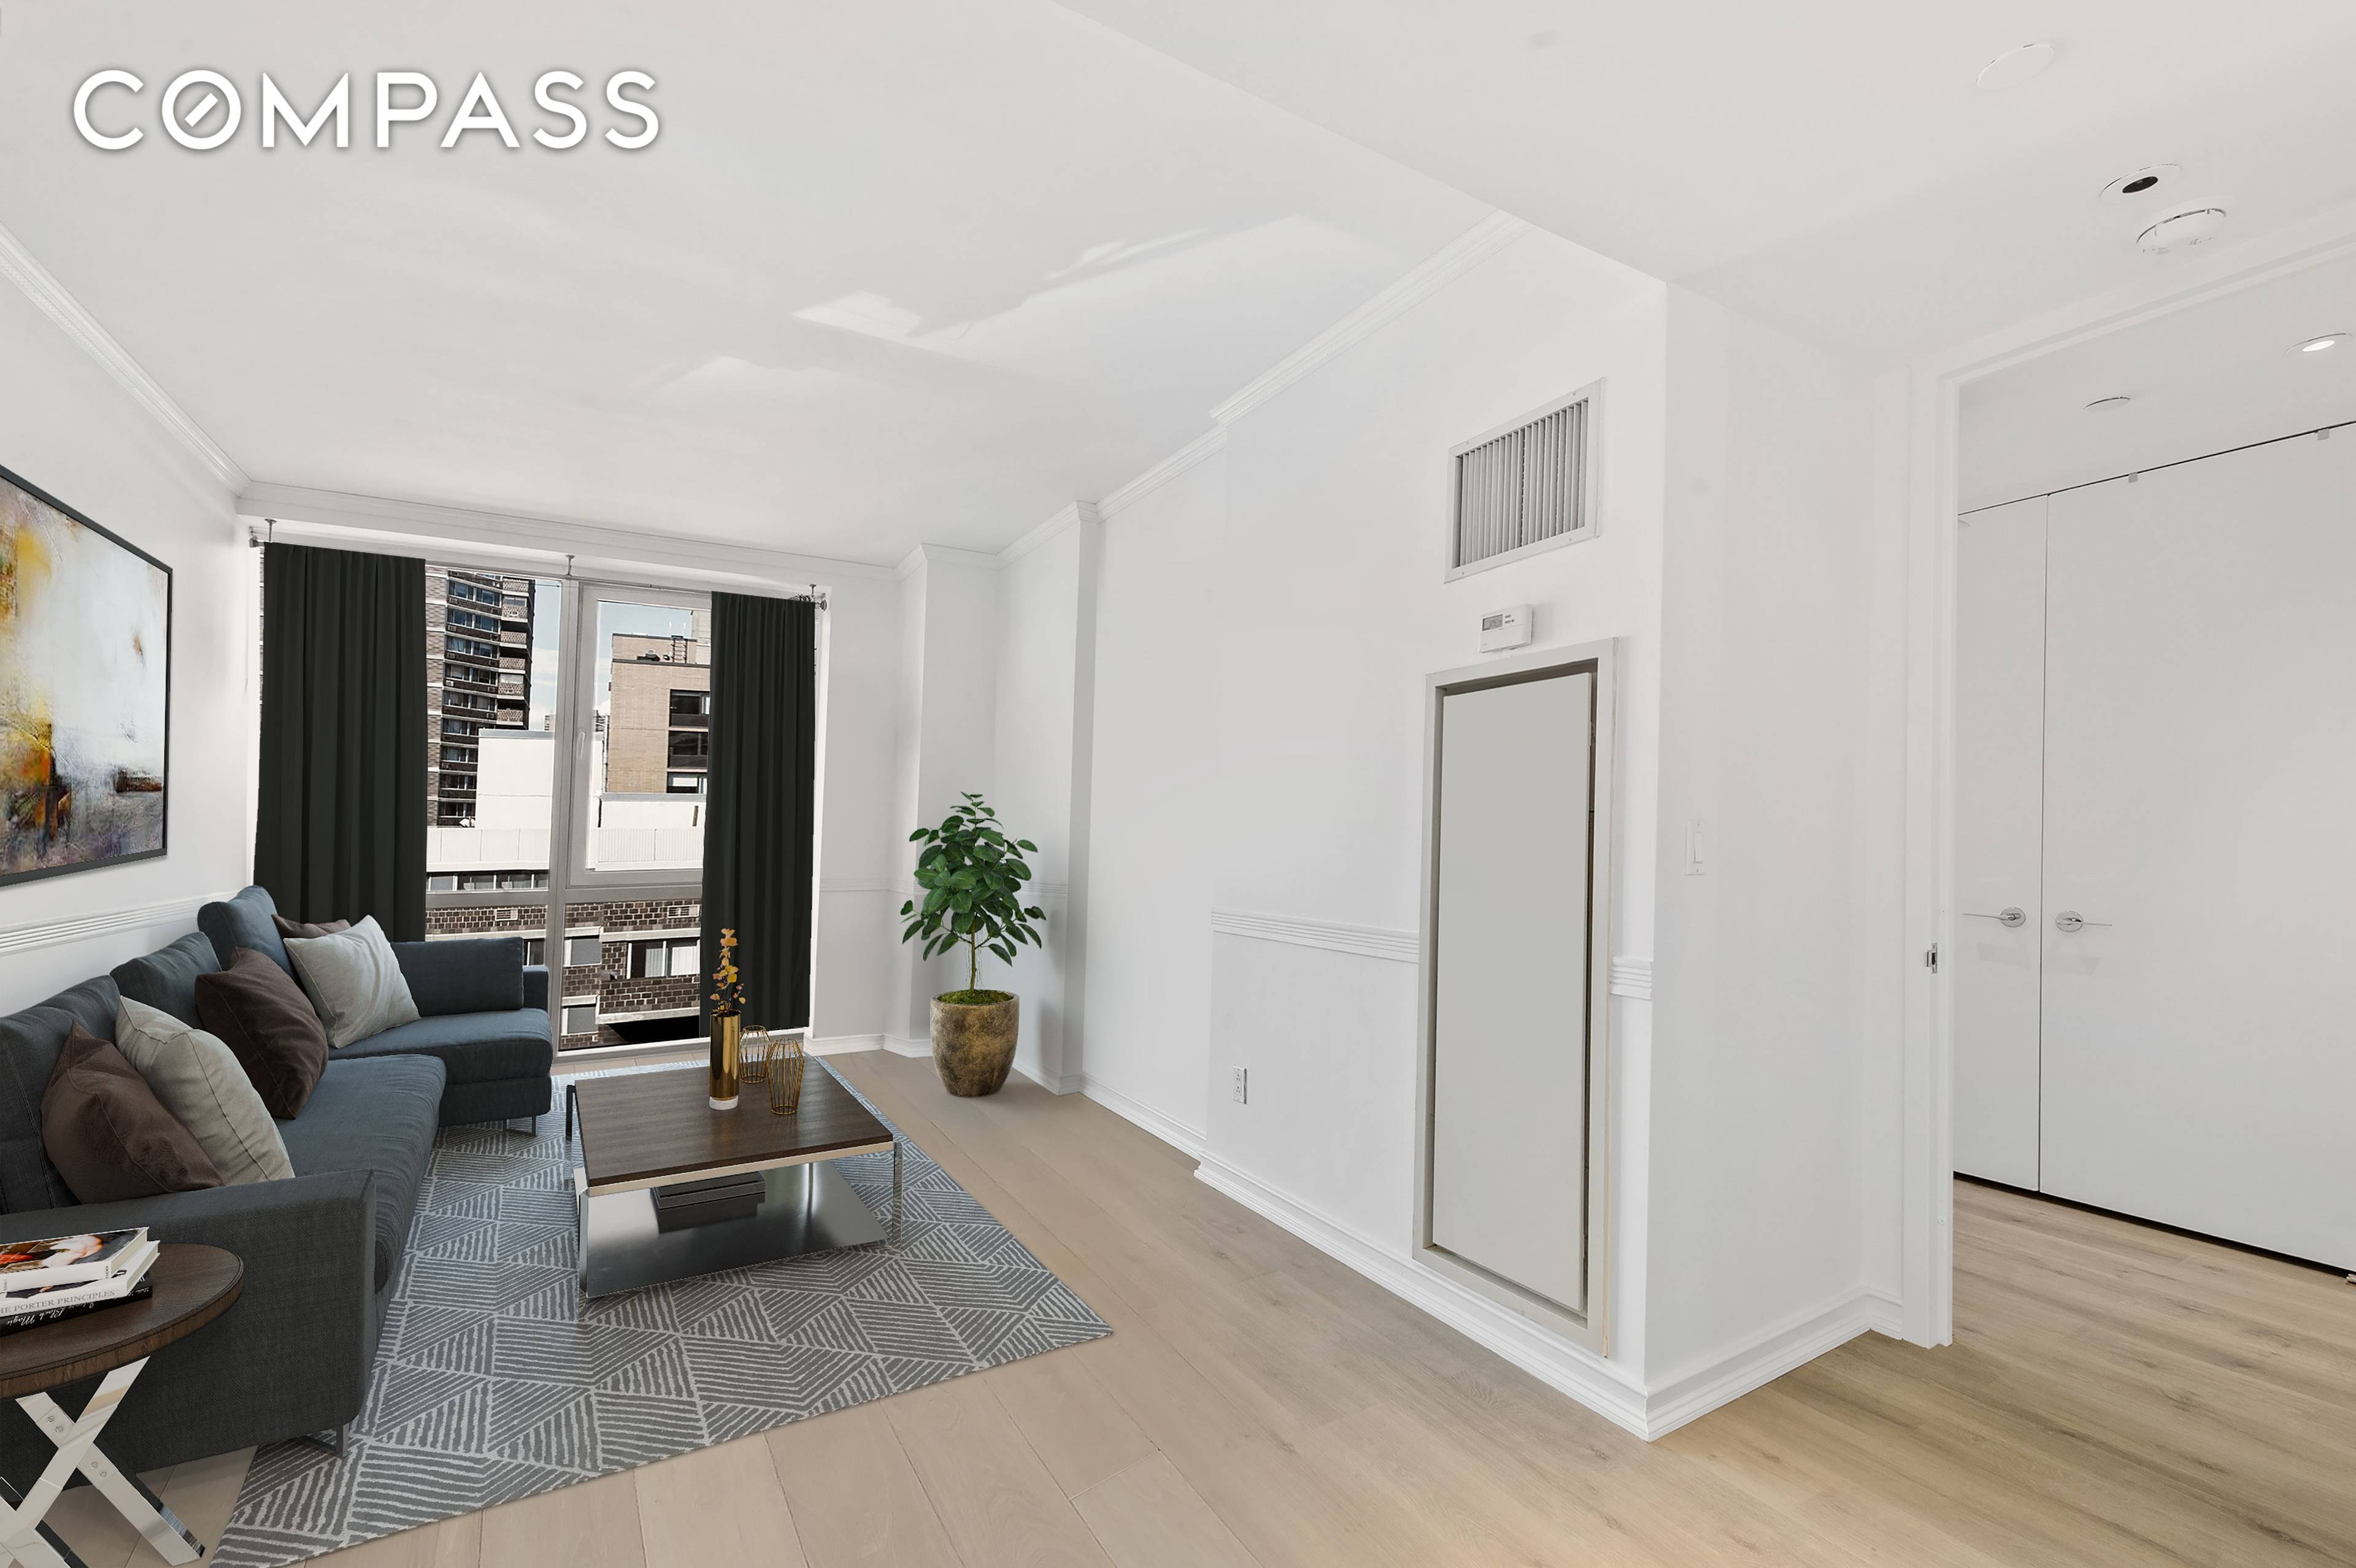 Welcome to the one of the most detailed and sophisticated one bedroom designer homes available throughout Gramercy, unit 11F at The Gramercy Stark.